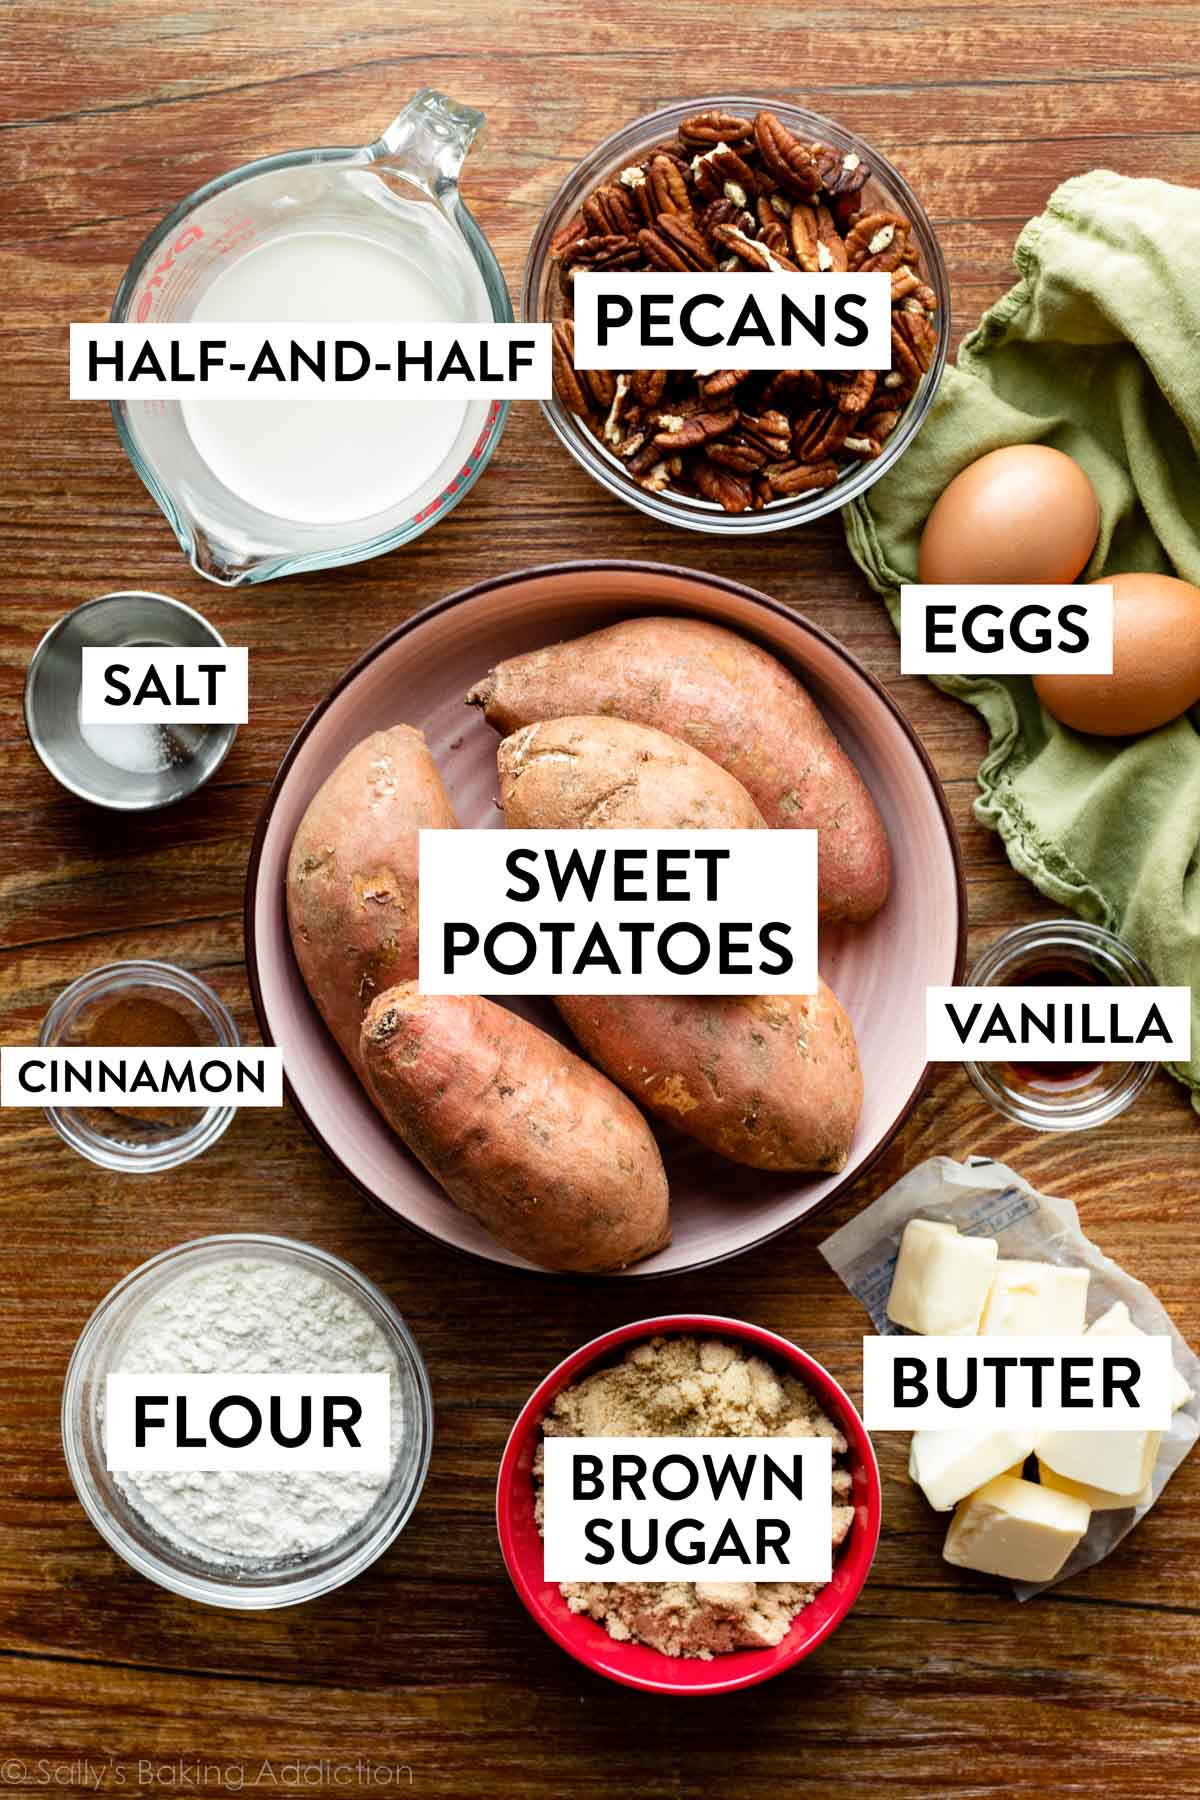 ingredients on wood backdrop including pecans, sweet potatoes, eggs, butter, brown sugar, and more.